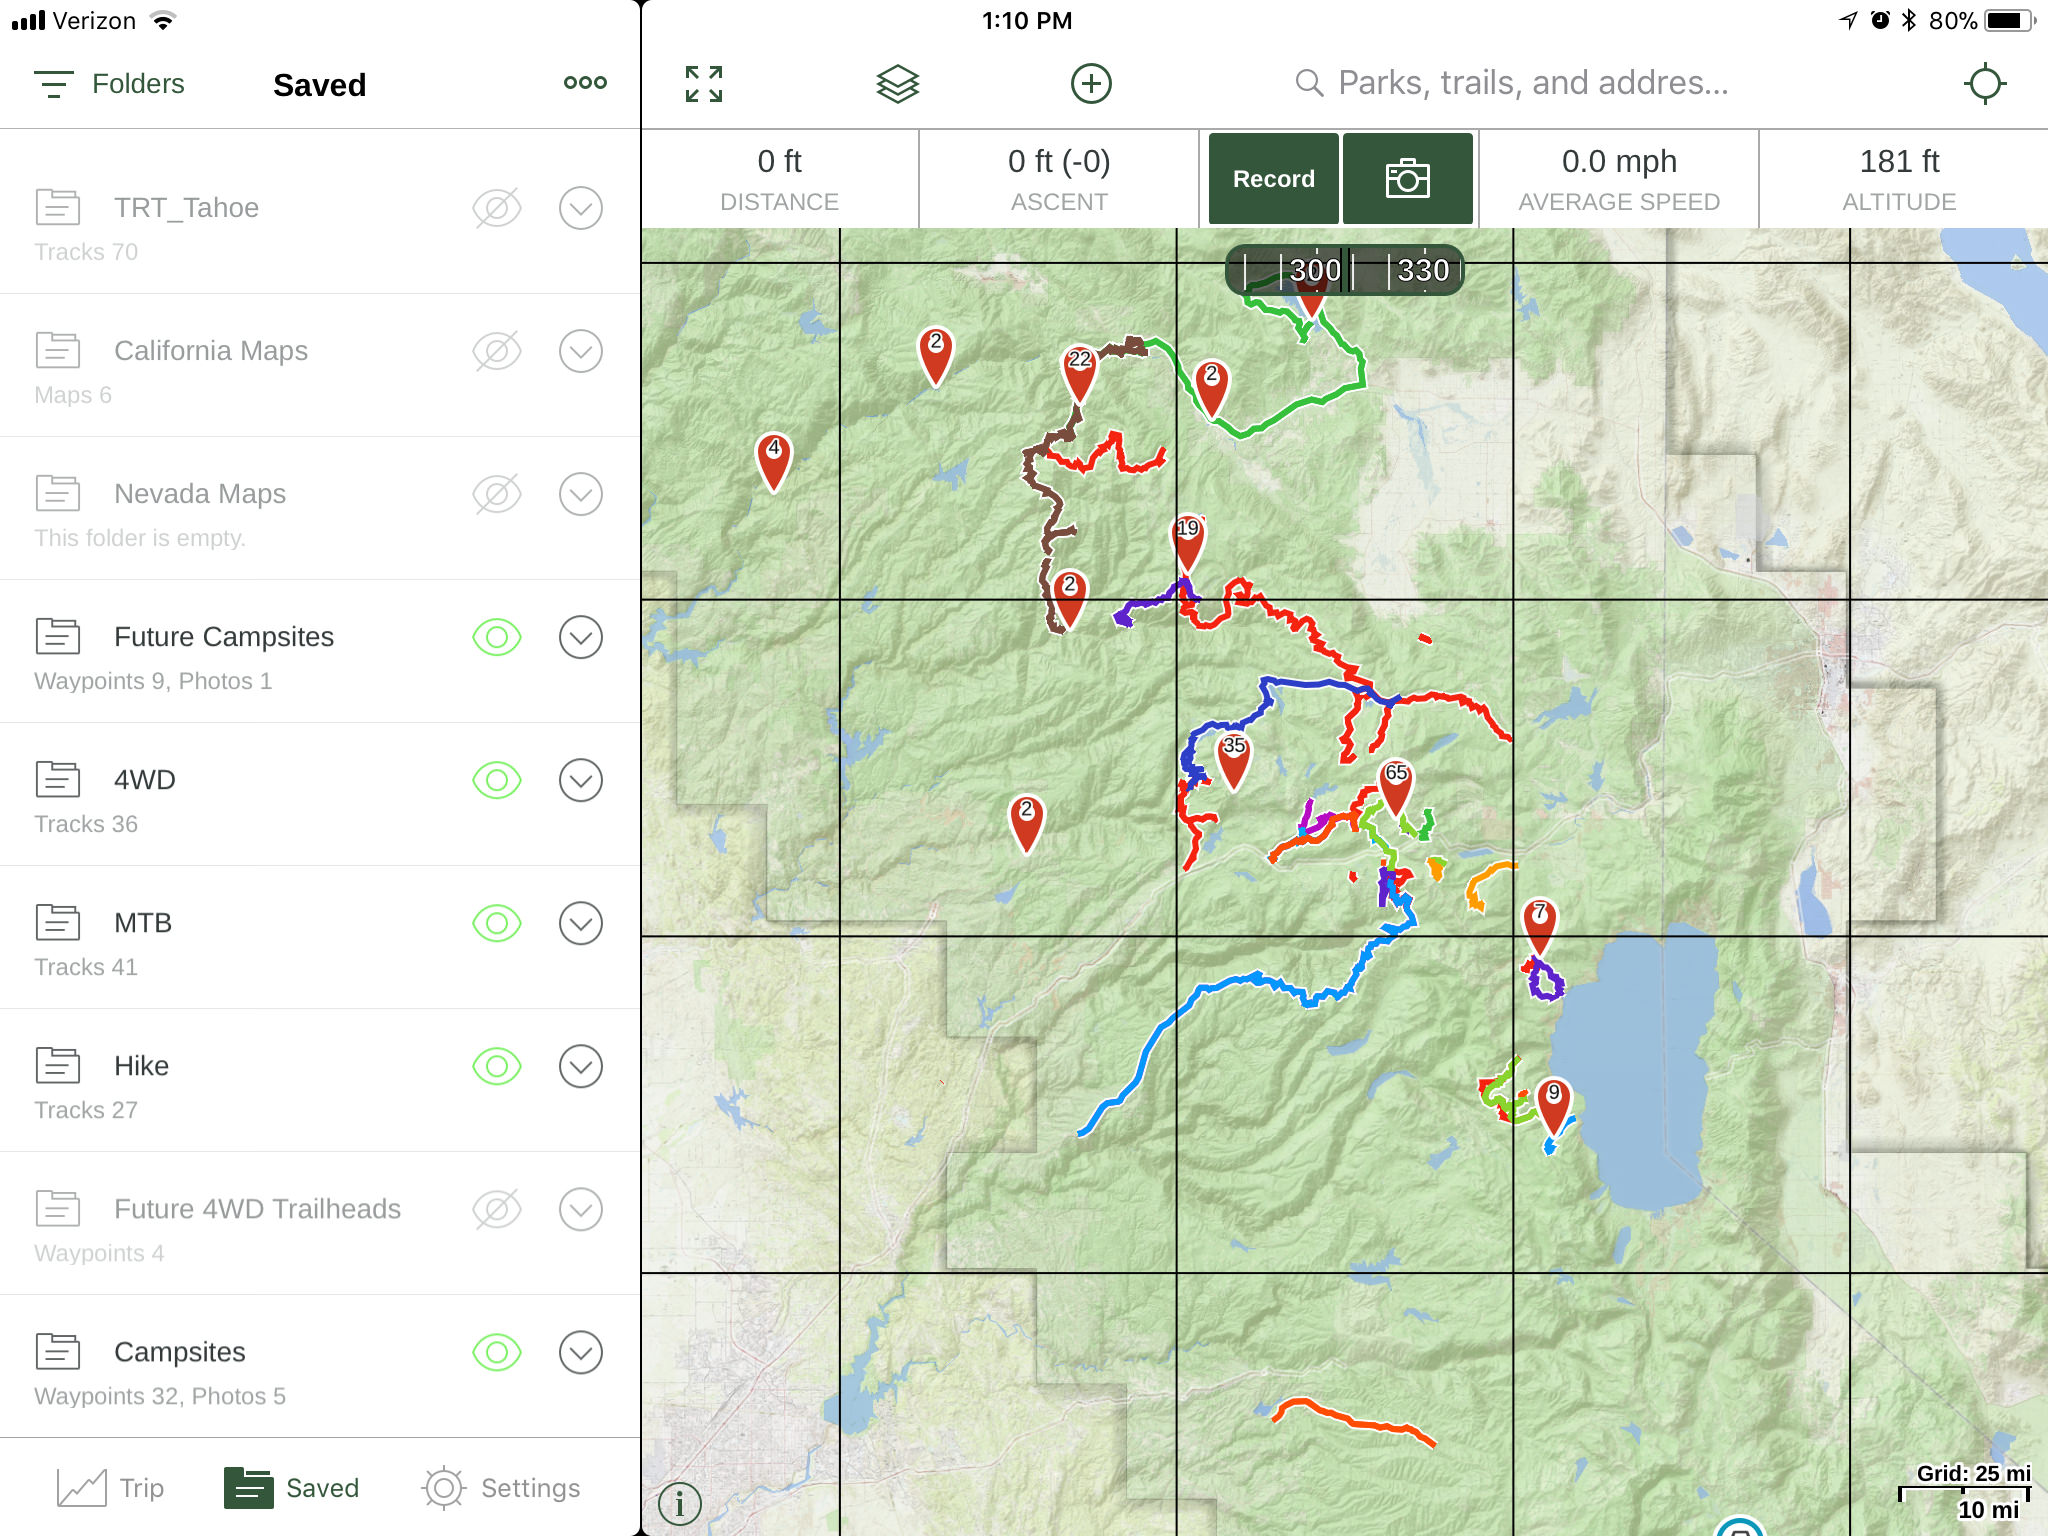  Folders will help organize your route, waypoints, and tracks. 